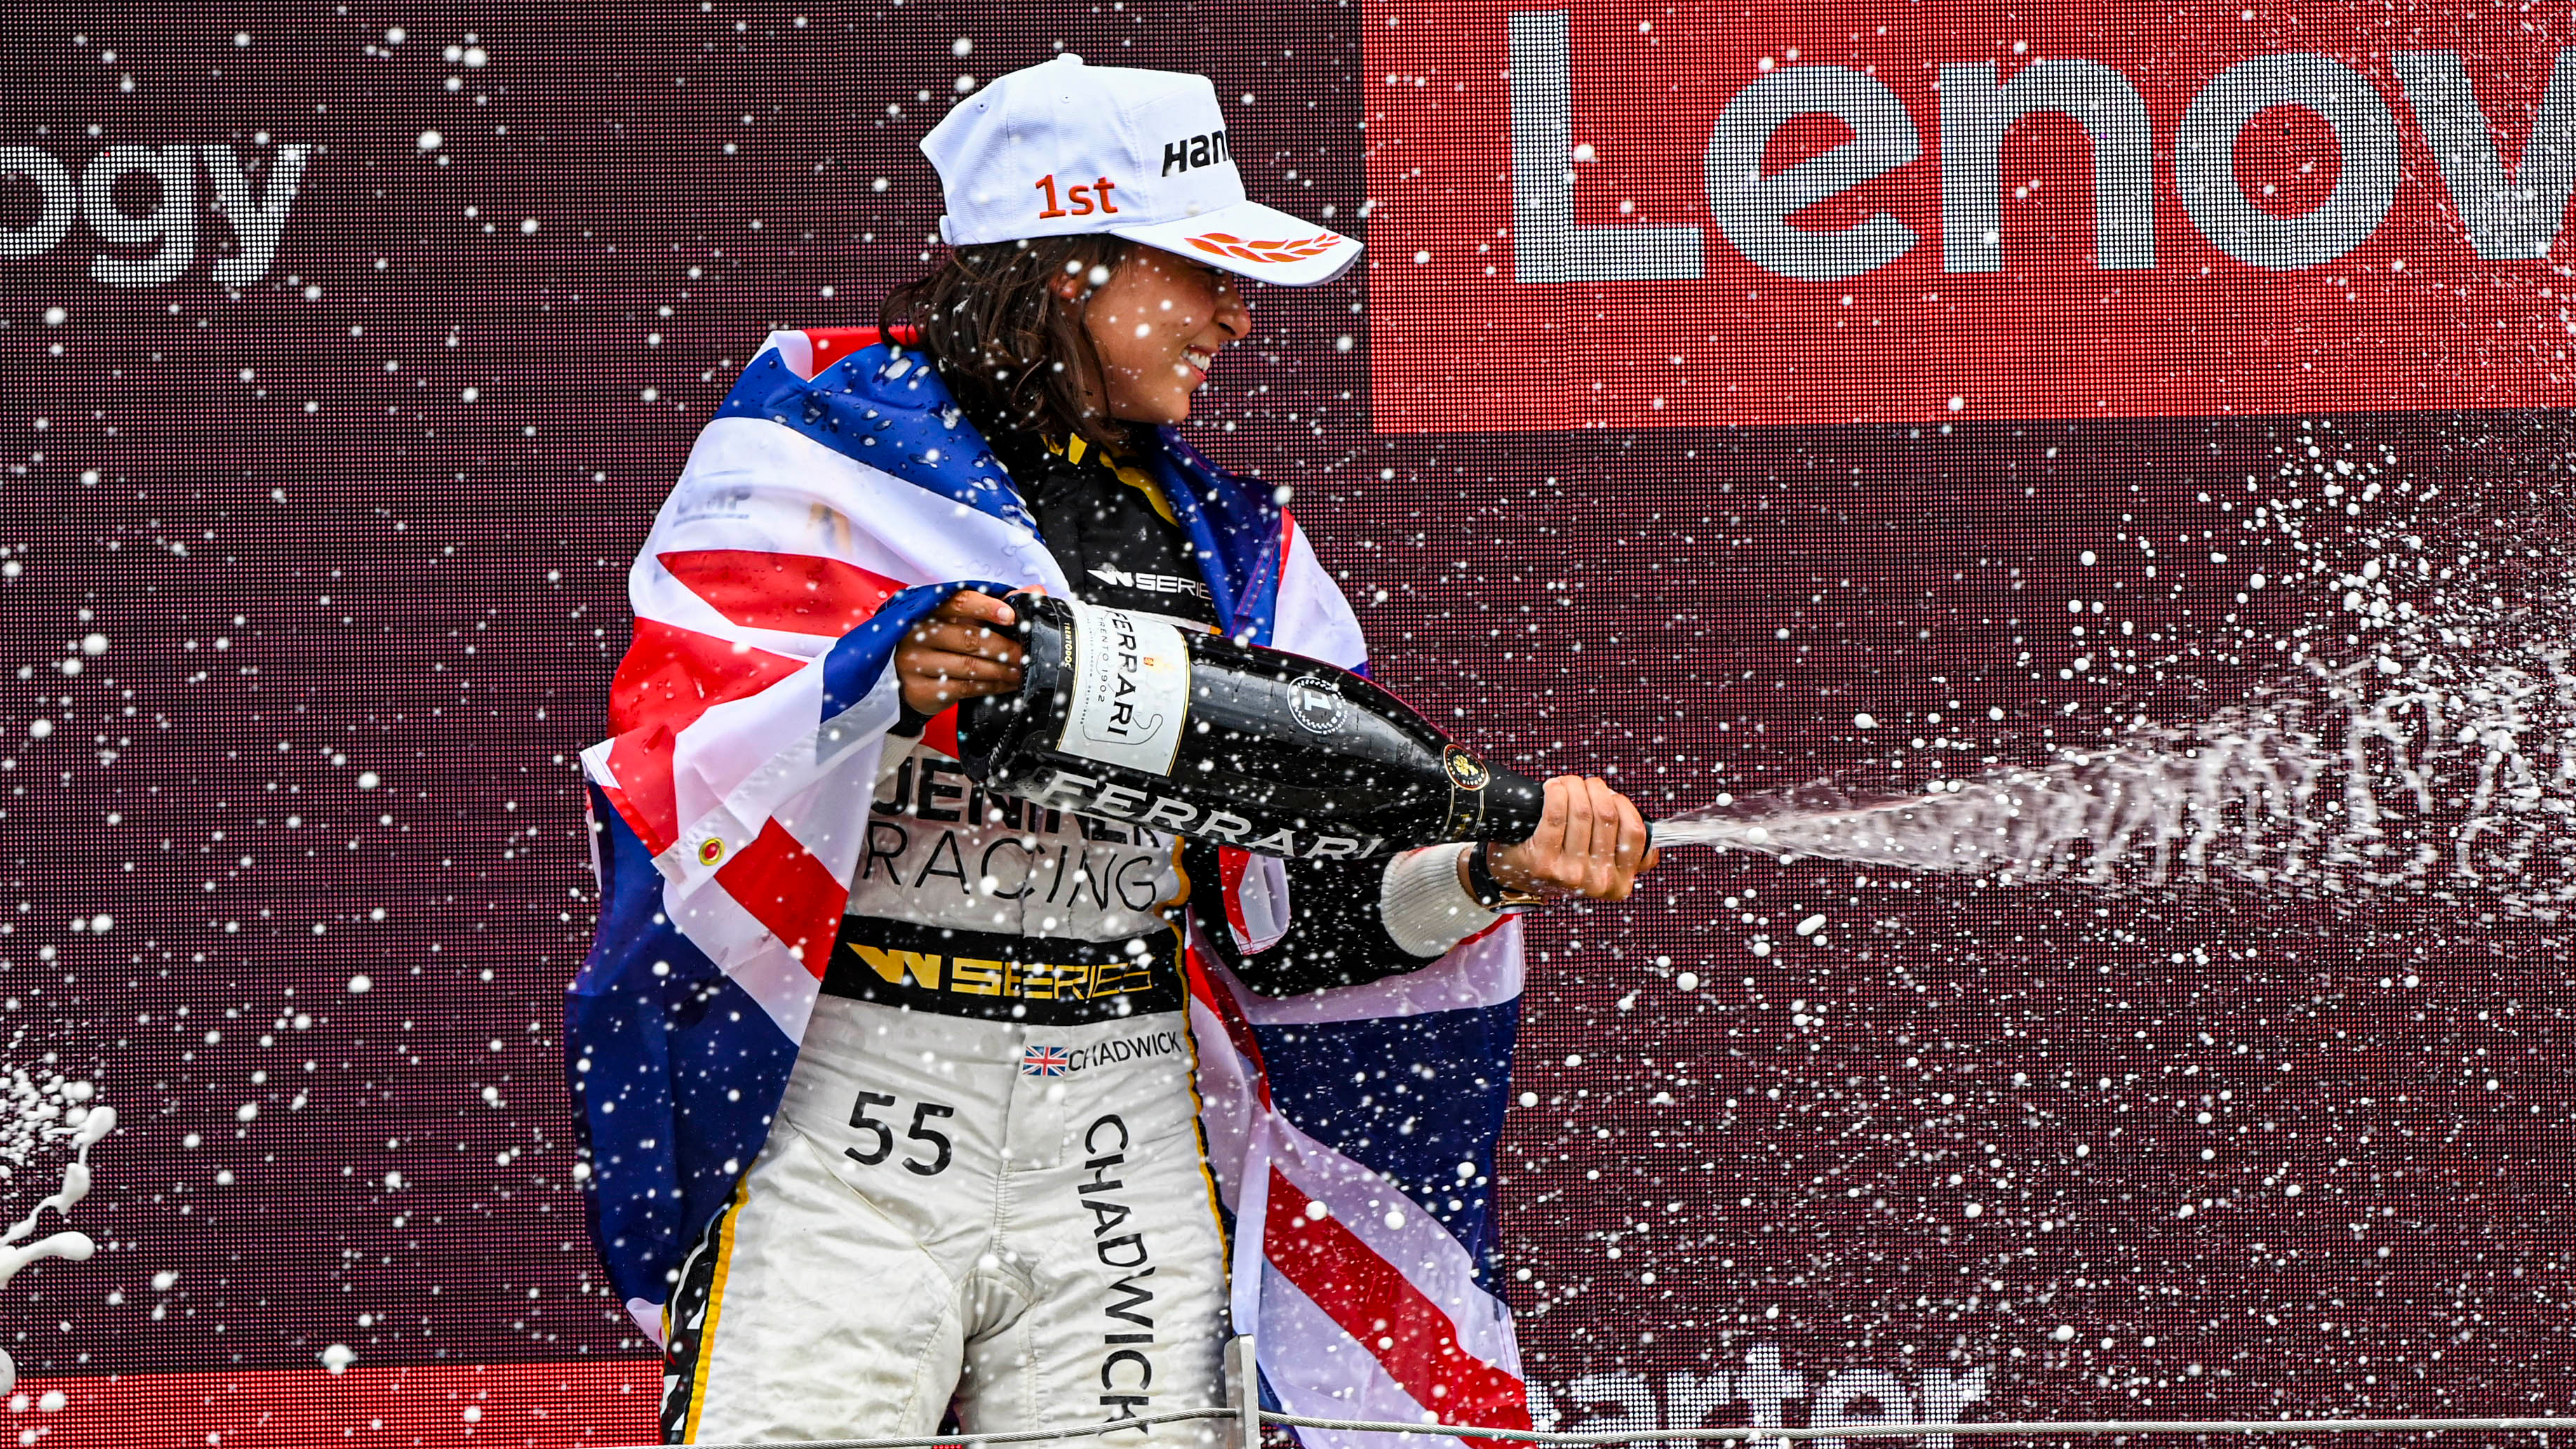 A woman with a white Hankook cap and brown hair sprays sparkling wine on the podium while draped in the Union Jack